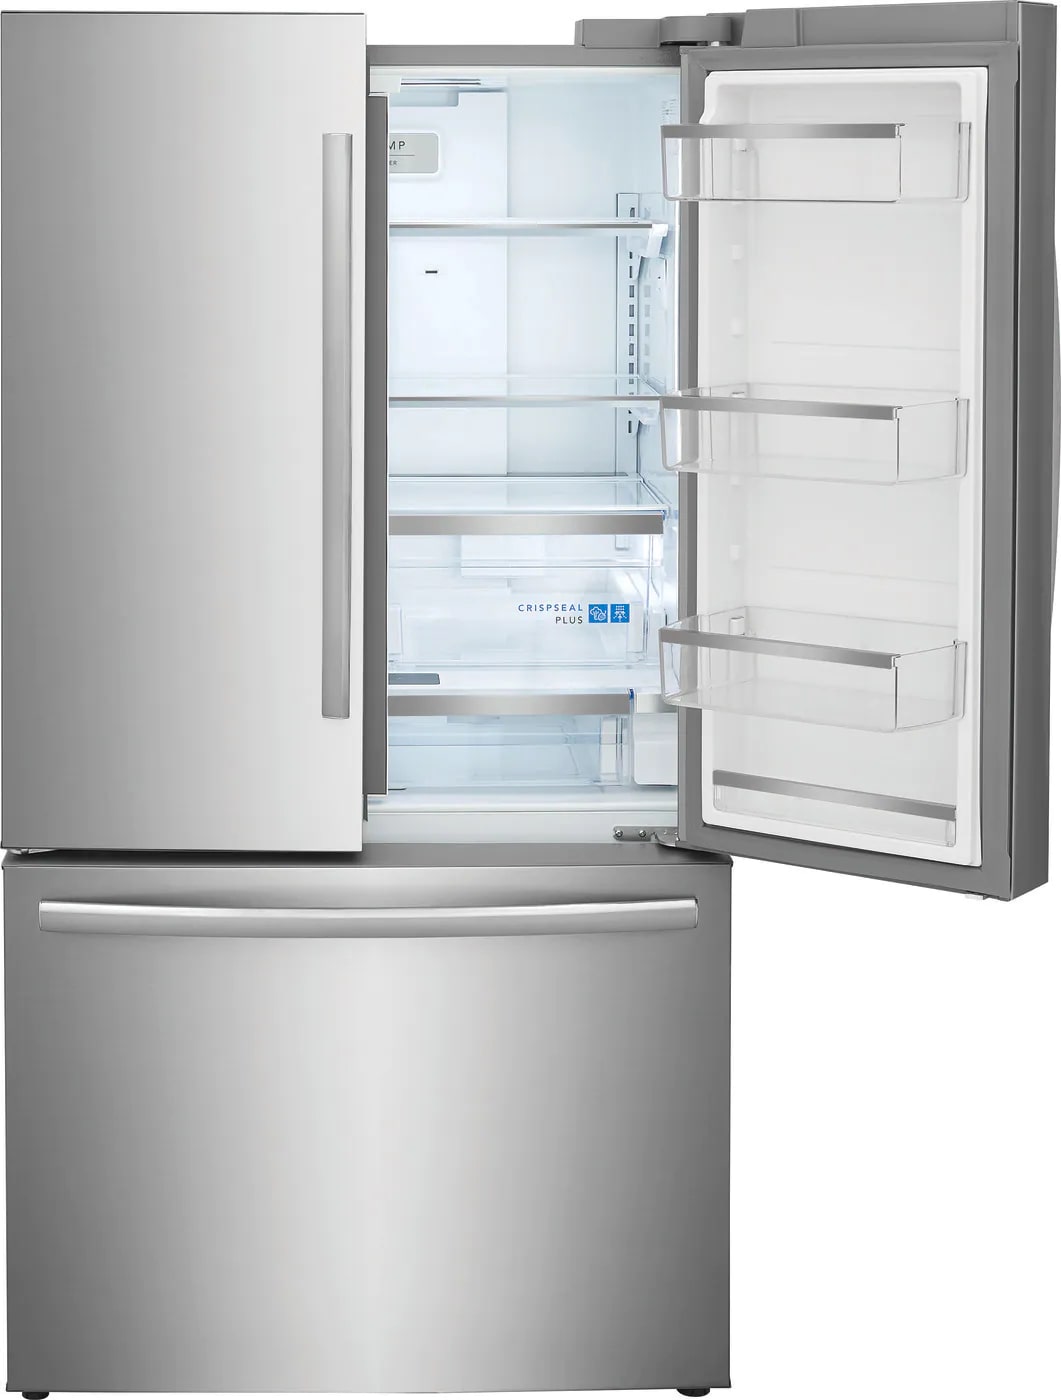 Frigidaire Gallery - 36 Inch 28.8 cu. ft French Door Refrigerator in Stainless - GRFN2853AF